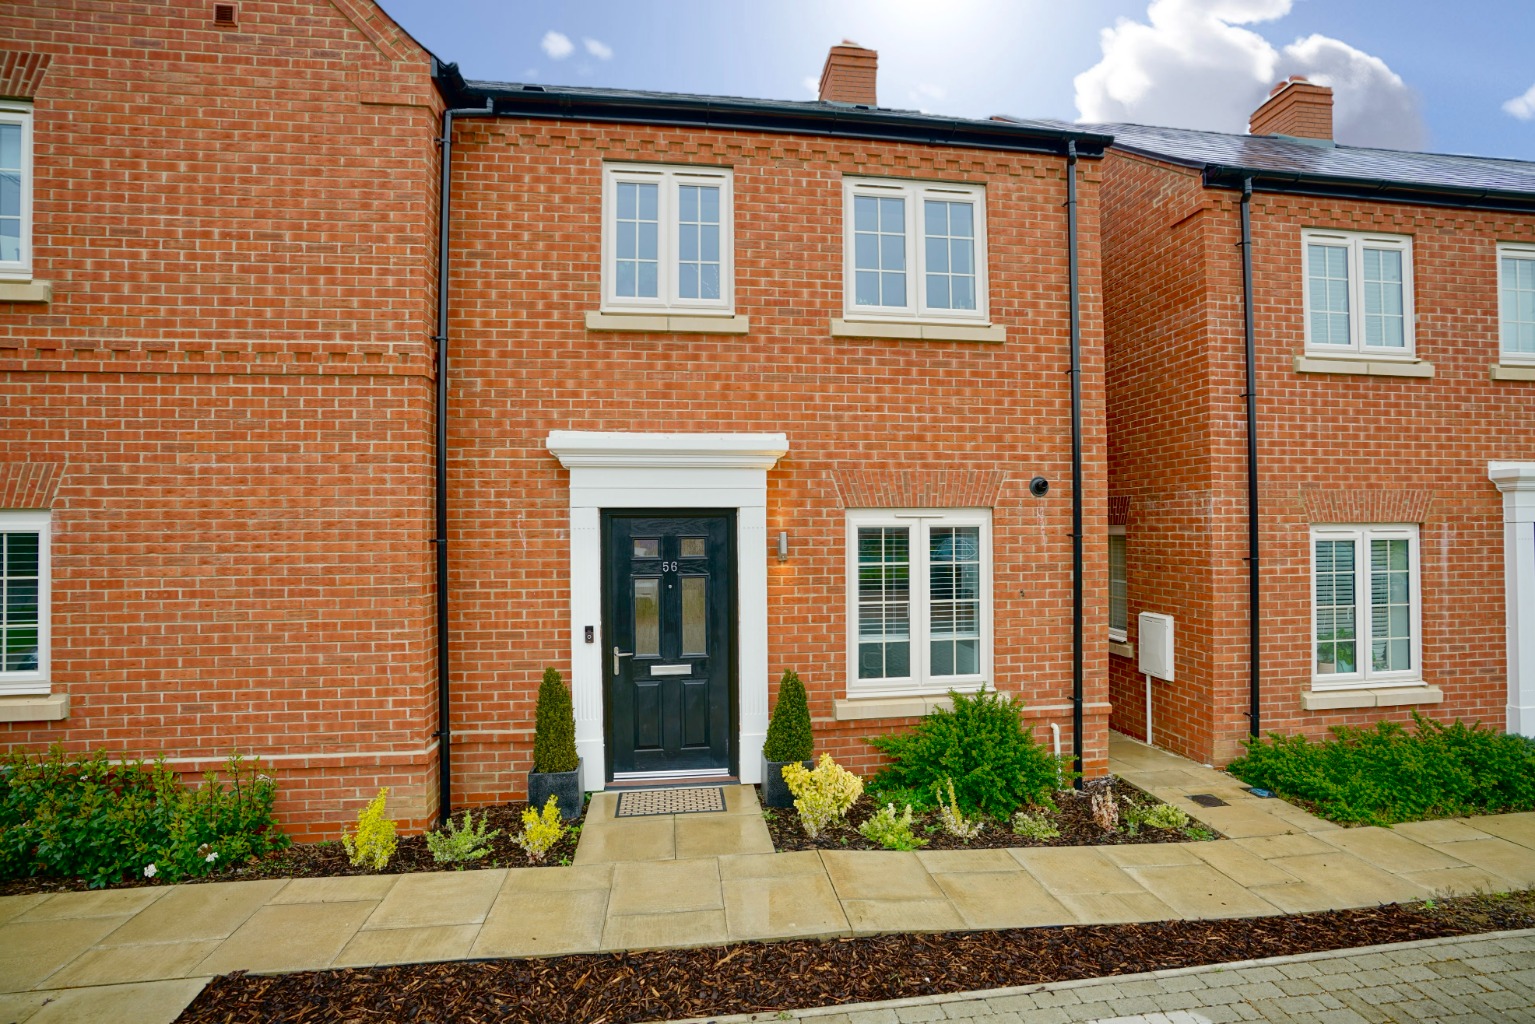 3 bed semi-detached house for sale in Jaric Lane, Huntingdon - Property Image 1